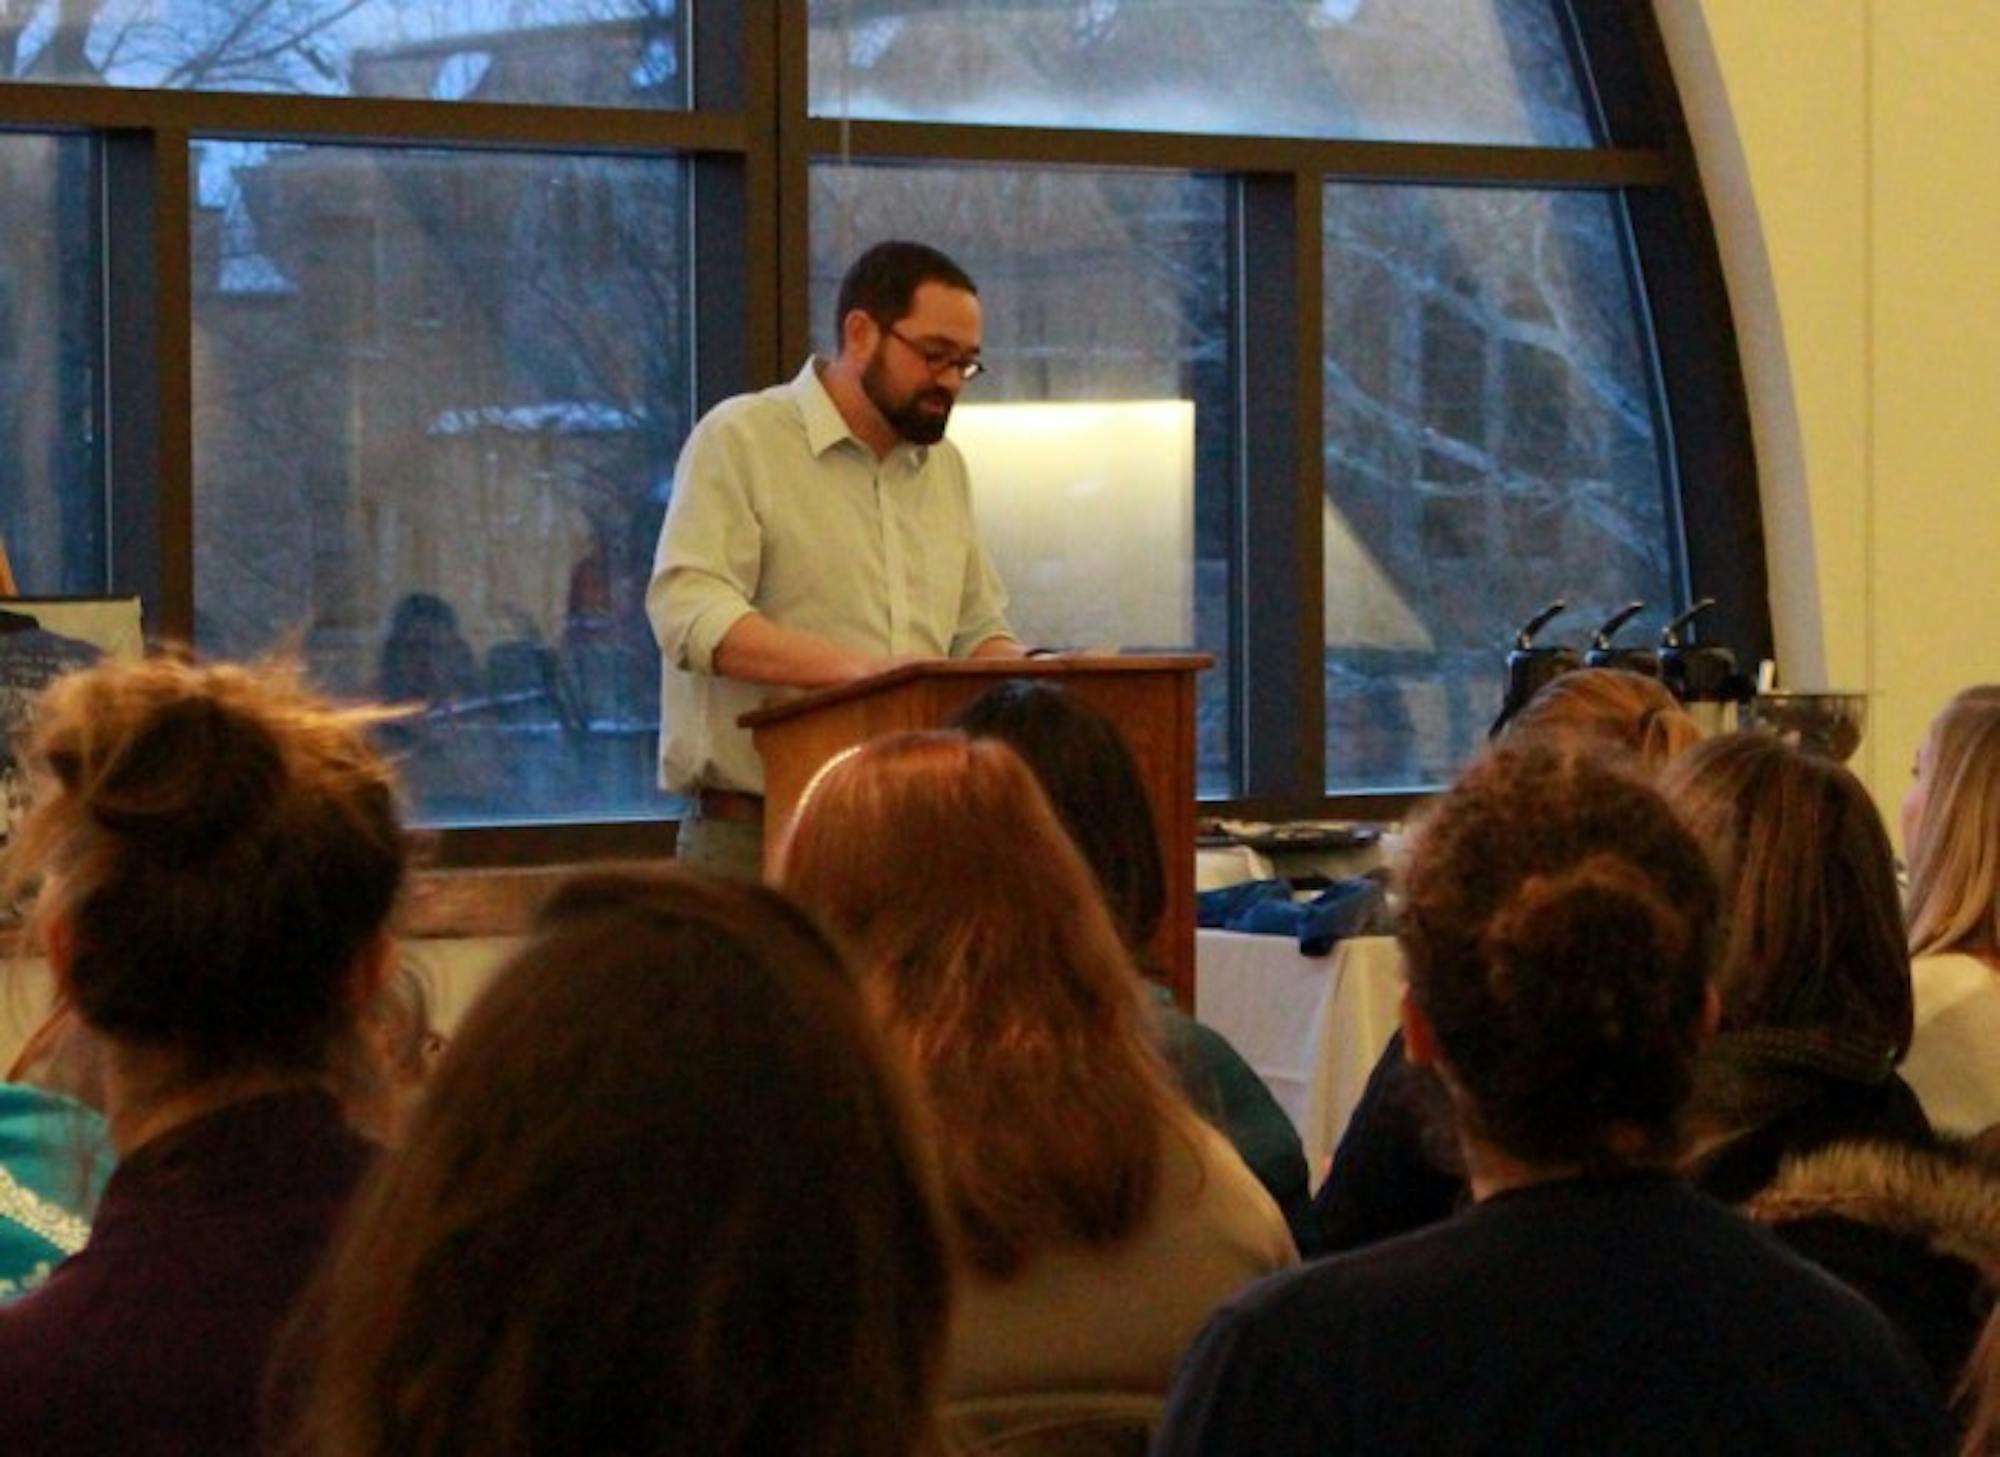 Aaron Bremyer, head of the English writing center at Saint Mary’s, reads a poem by a student during the “Then and Now” poetry reading.